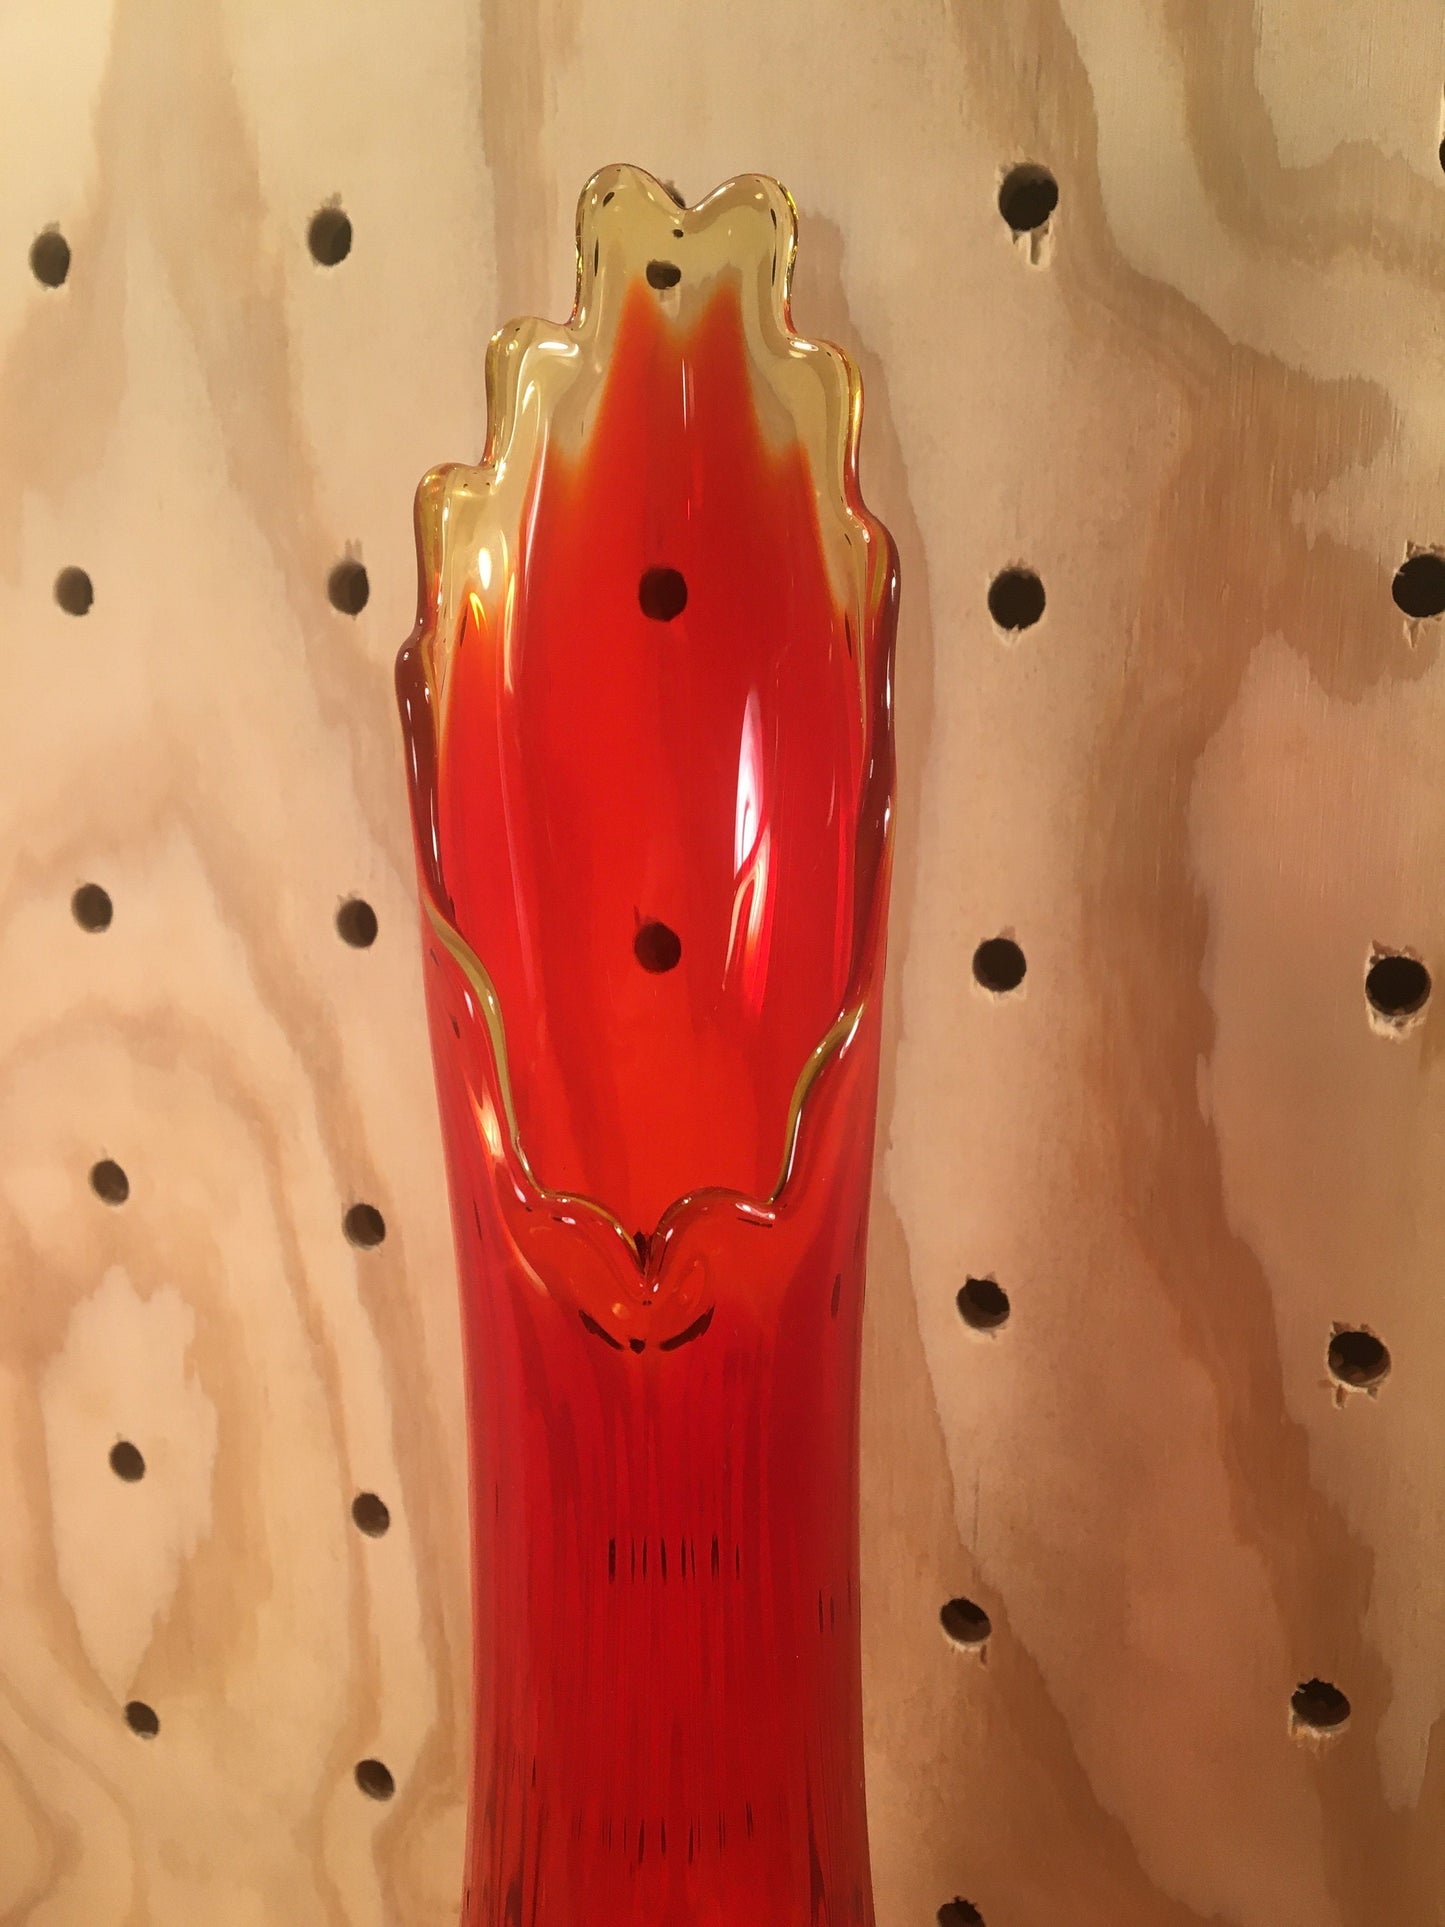 Vintage Swung Glass Vase - 1960's Amberina Flame Glass - Red, Orange, Yellow Ombré